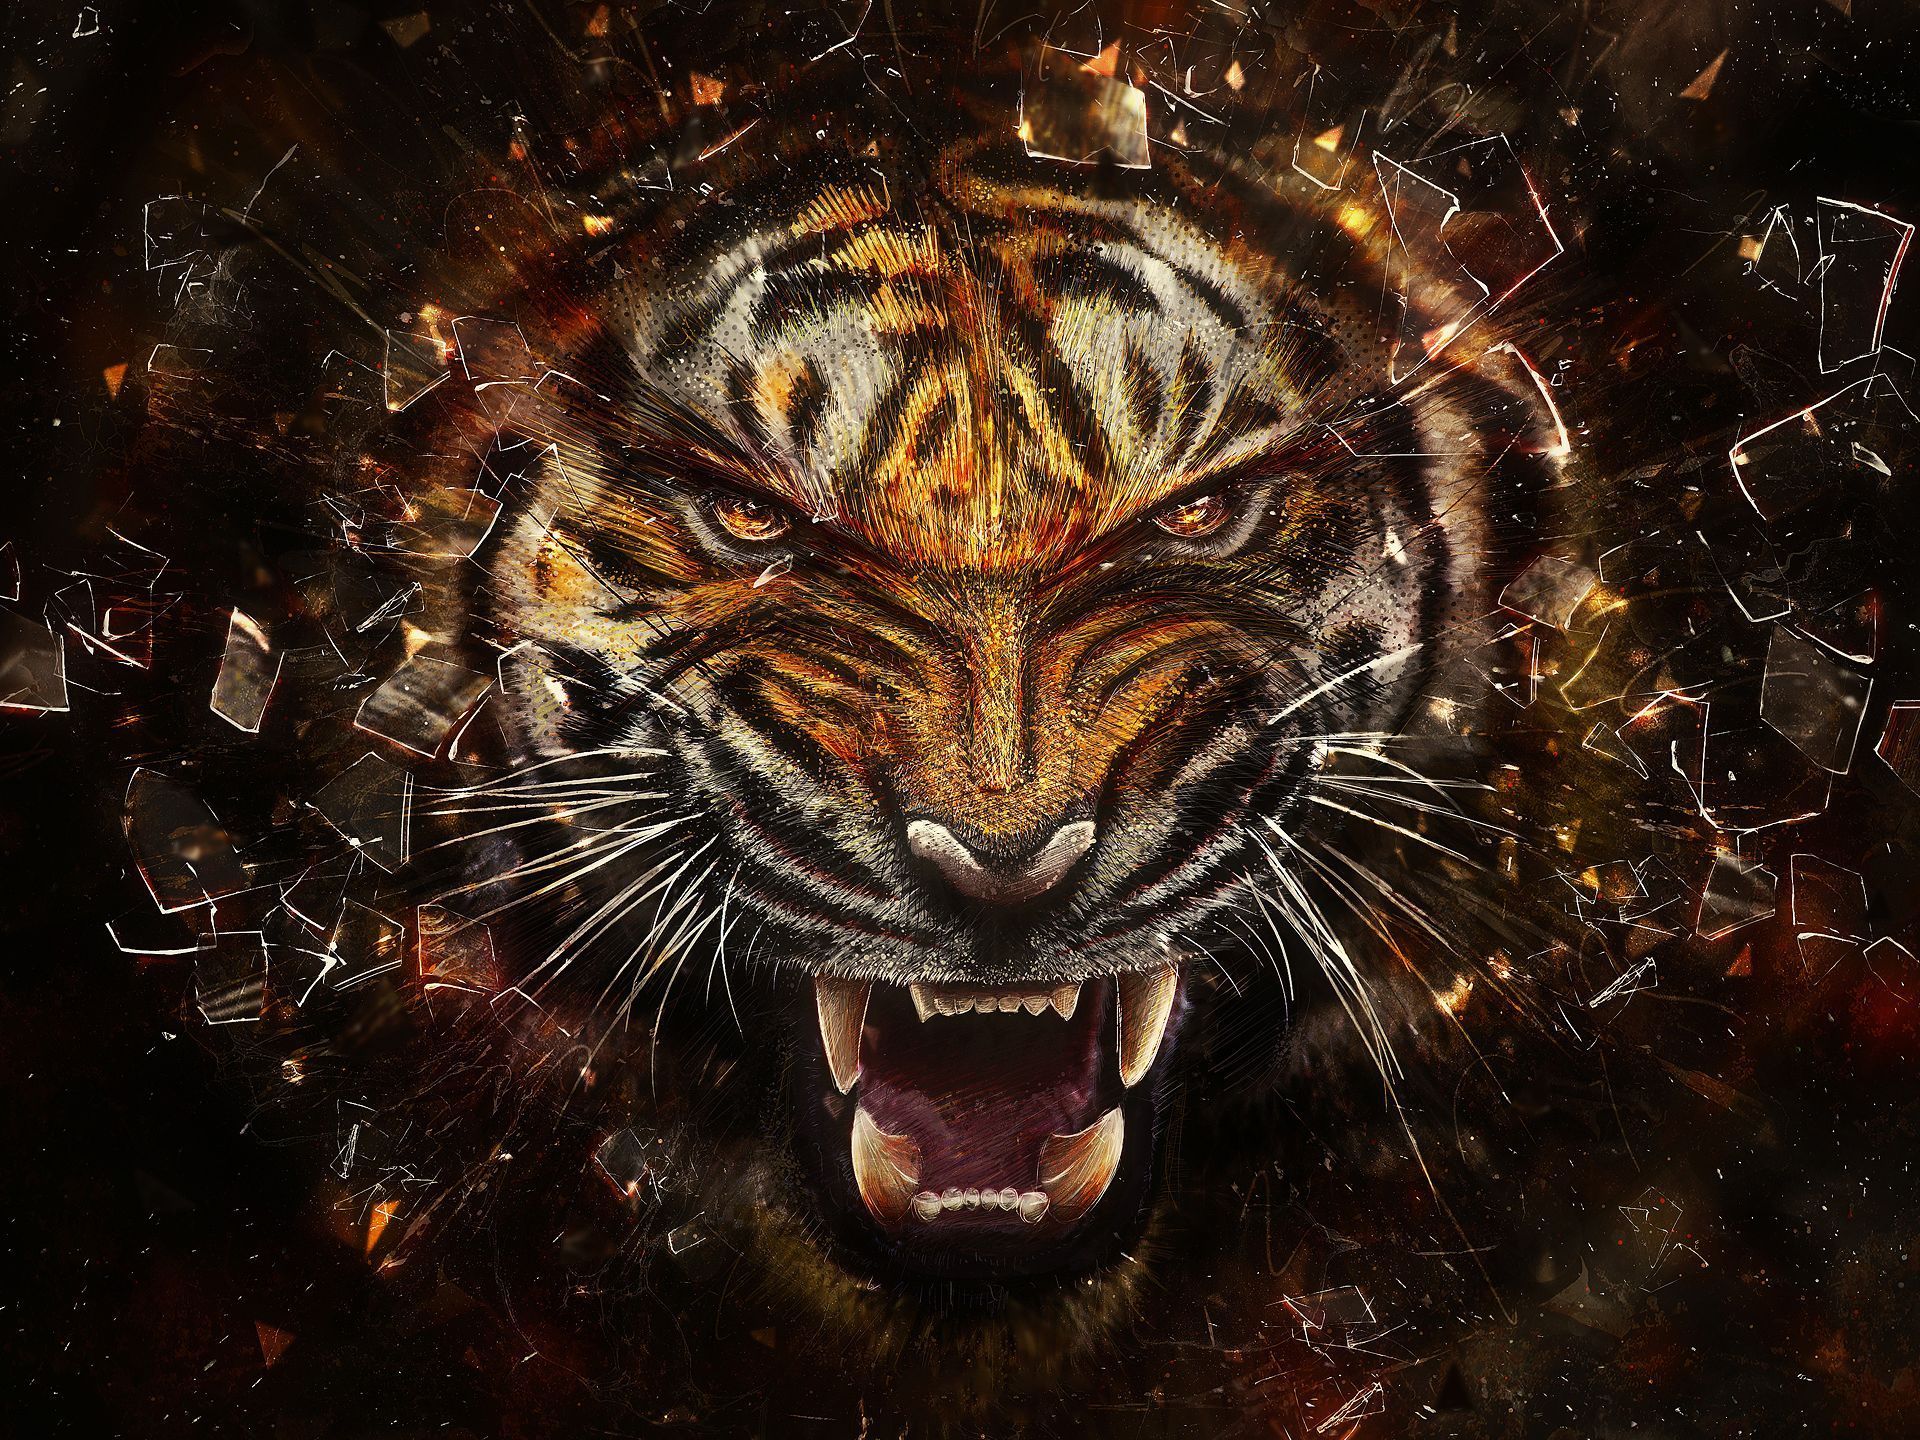 Angry Tiger - Tigers Wallpaper 31737545 - Fanpop